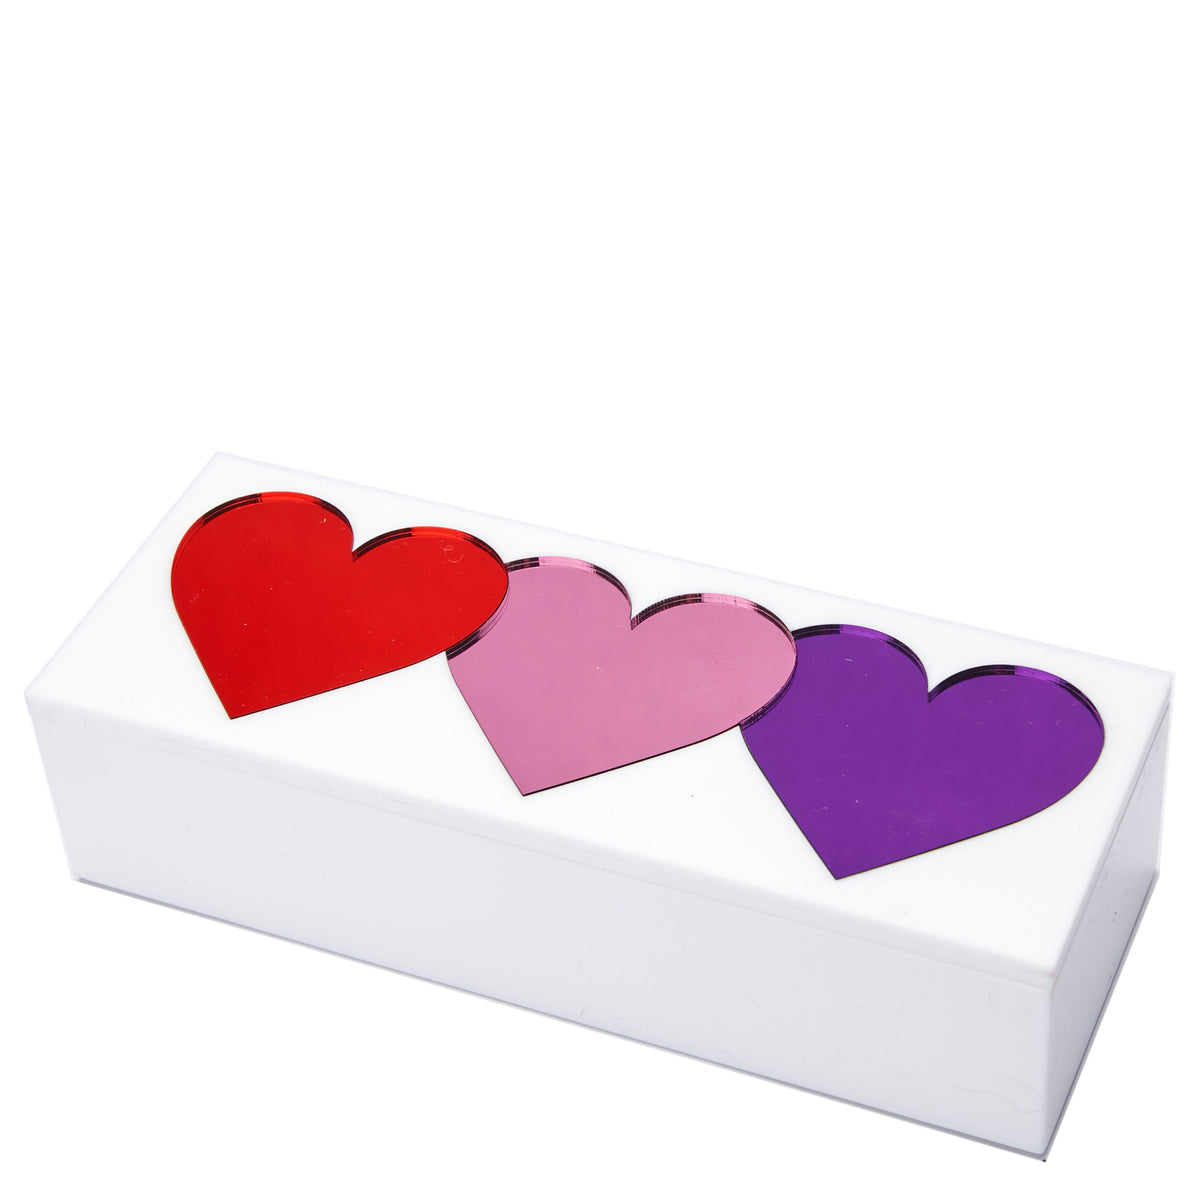 Box TRINKETS HEARTS 8 inches by 3 inches